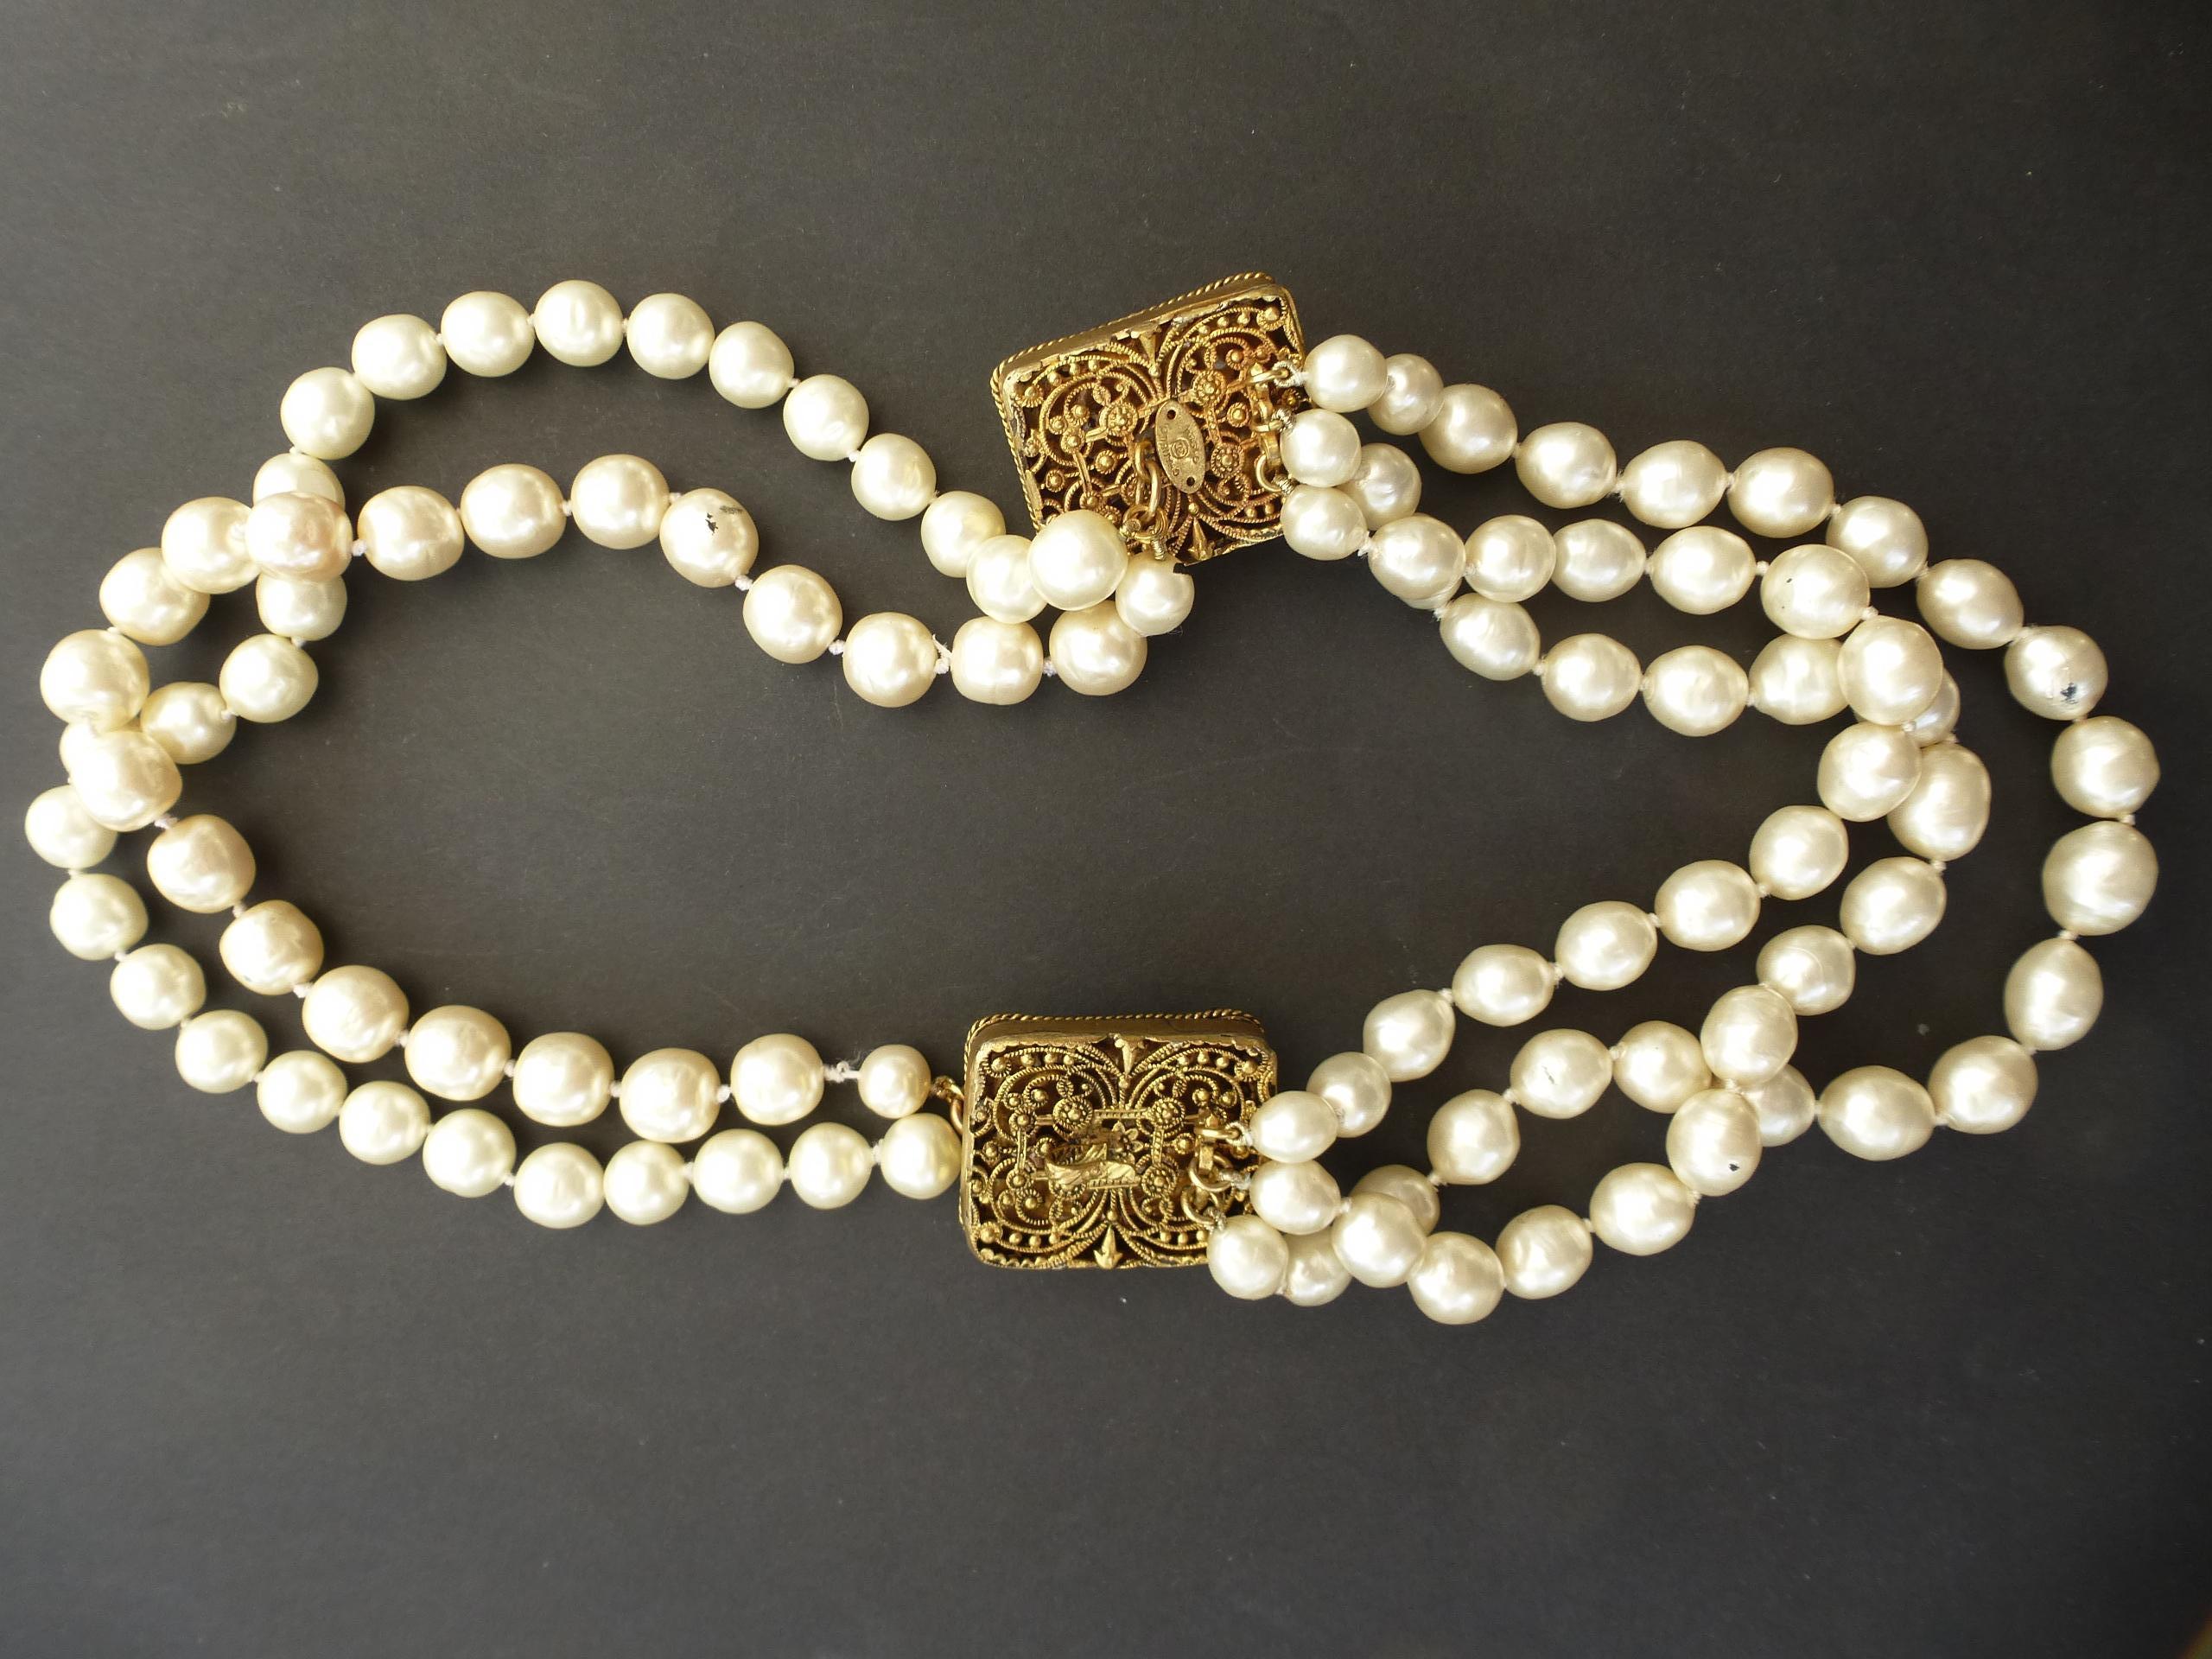 Round Cut Vintage Chanel pearl necklace by R. Goossens and House of Gripoix signed 1984.